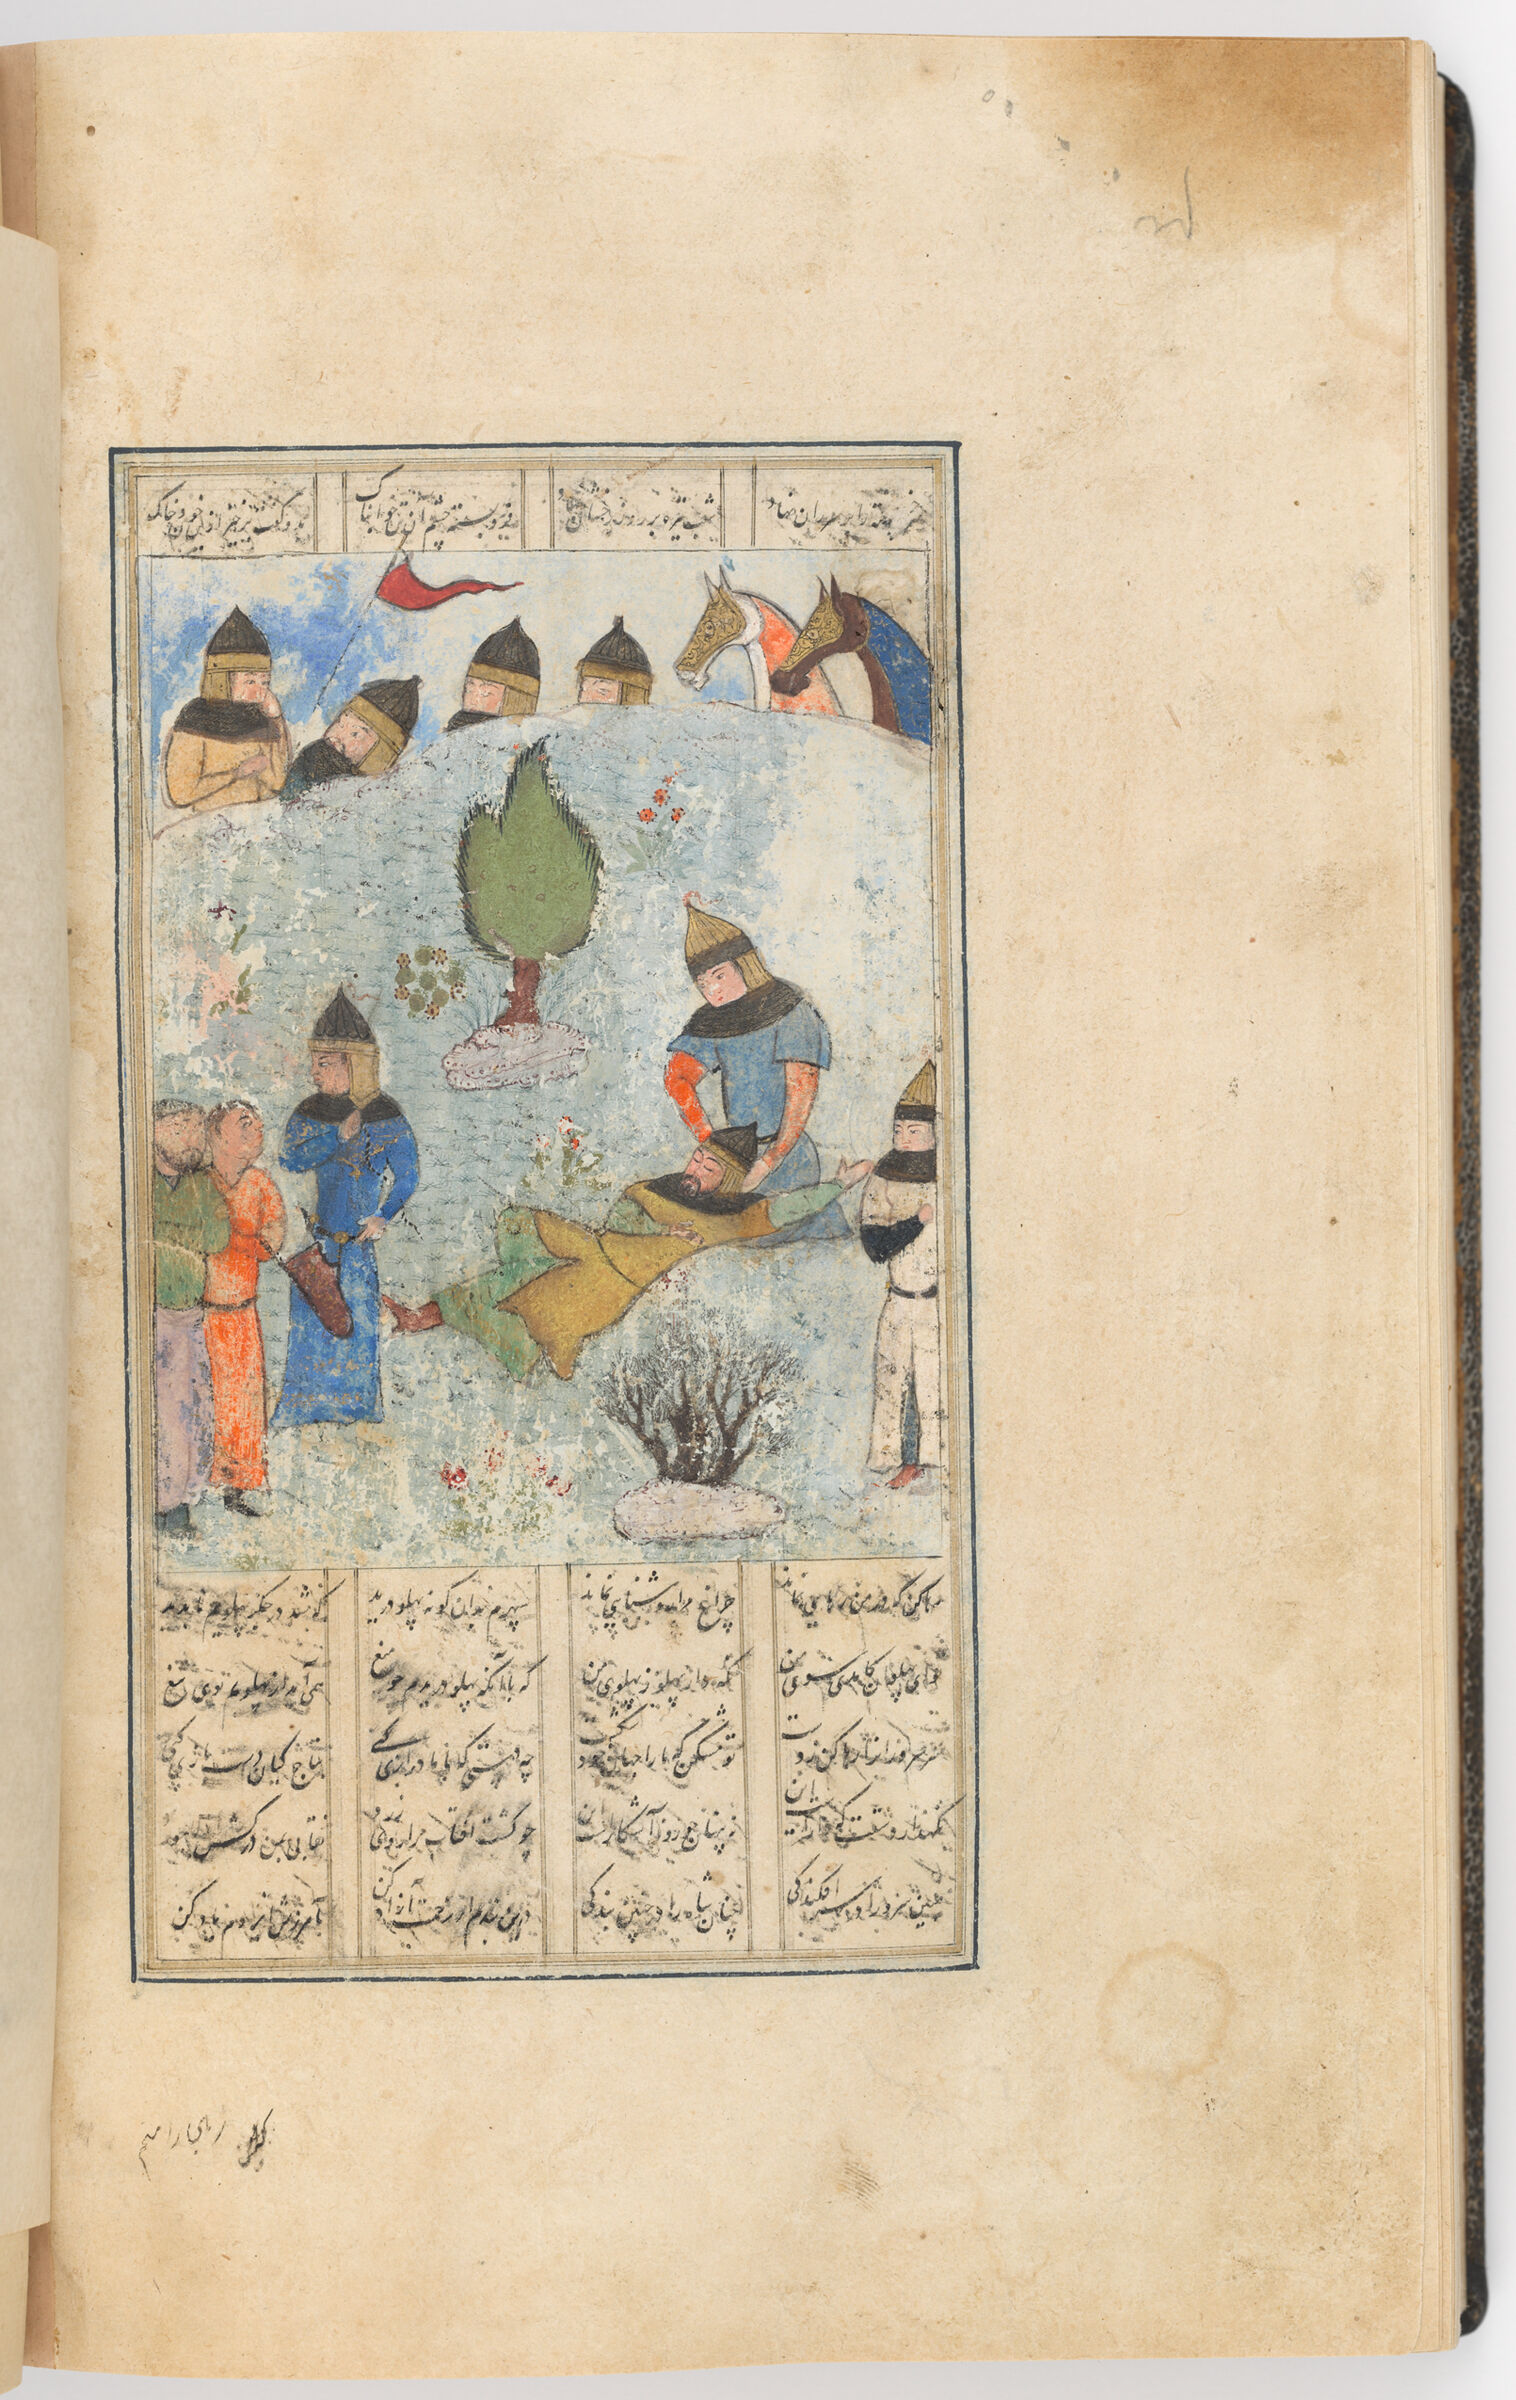 Iskandar Comforting The Dying Dara (Text Recto; Painting Verso Of Folio 276), Painting From A Manuscript Of The Khamsa By Nizami